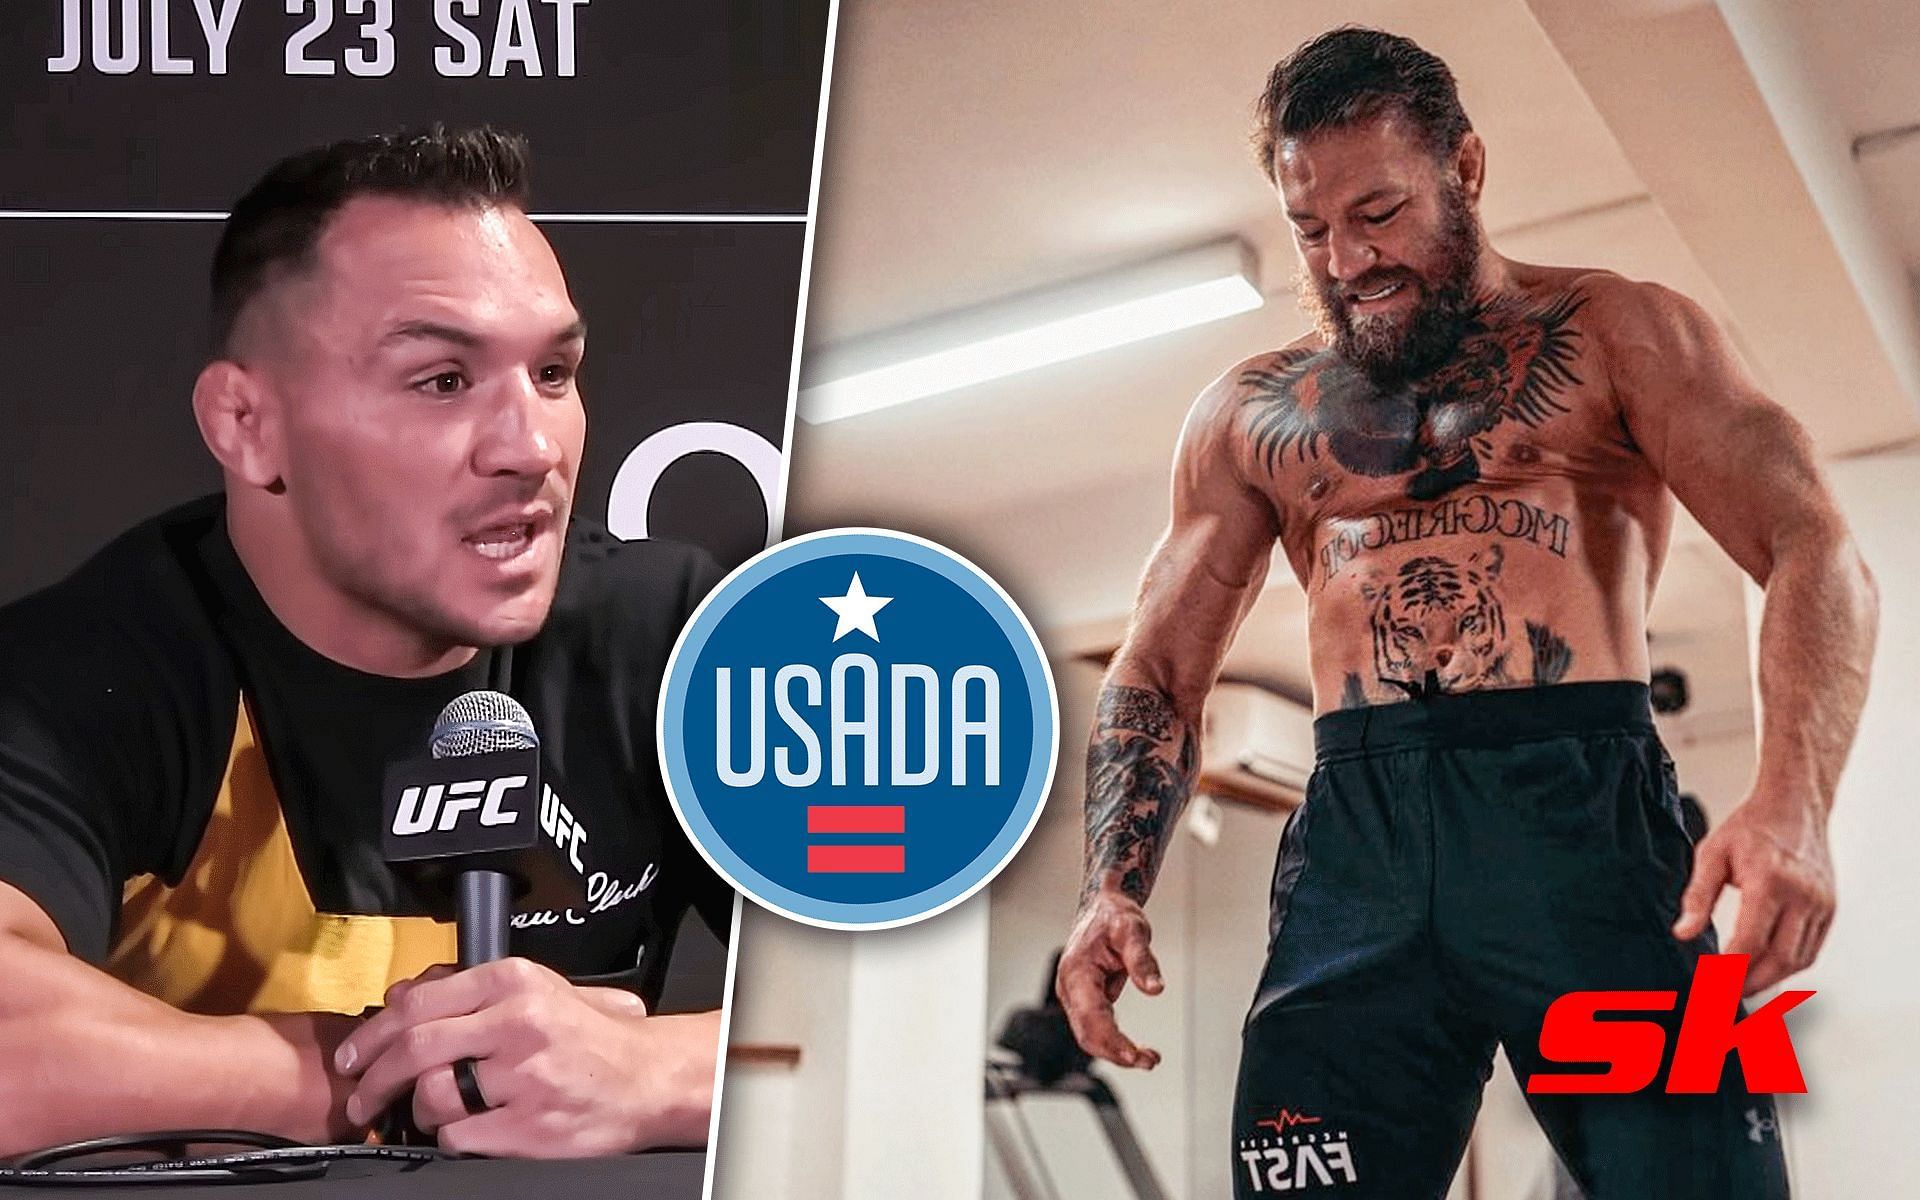 Michael Chandler (Left) and Conor McGregor (Right) [Images via: Chandler from TheMacLife | YouTube, @thenotoriousmma on Instagram, and logo from usada.org]